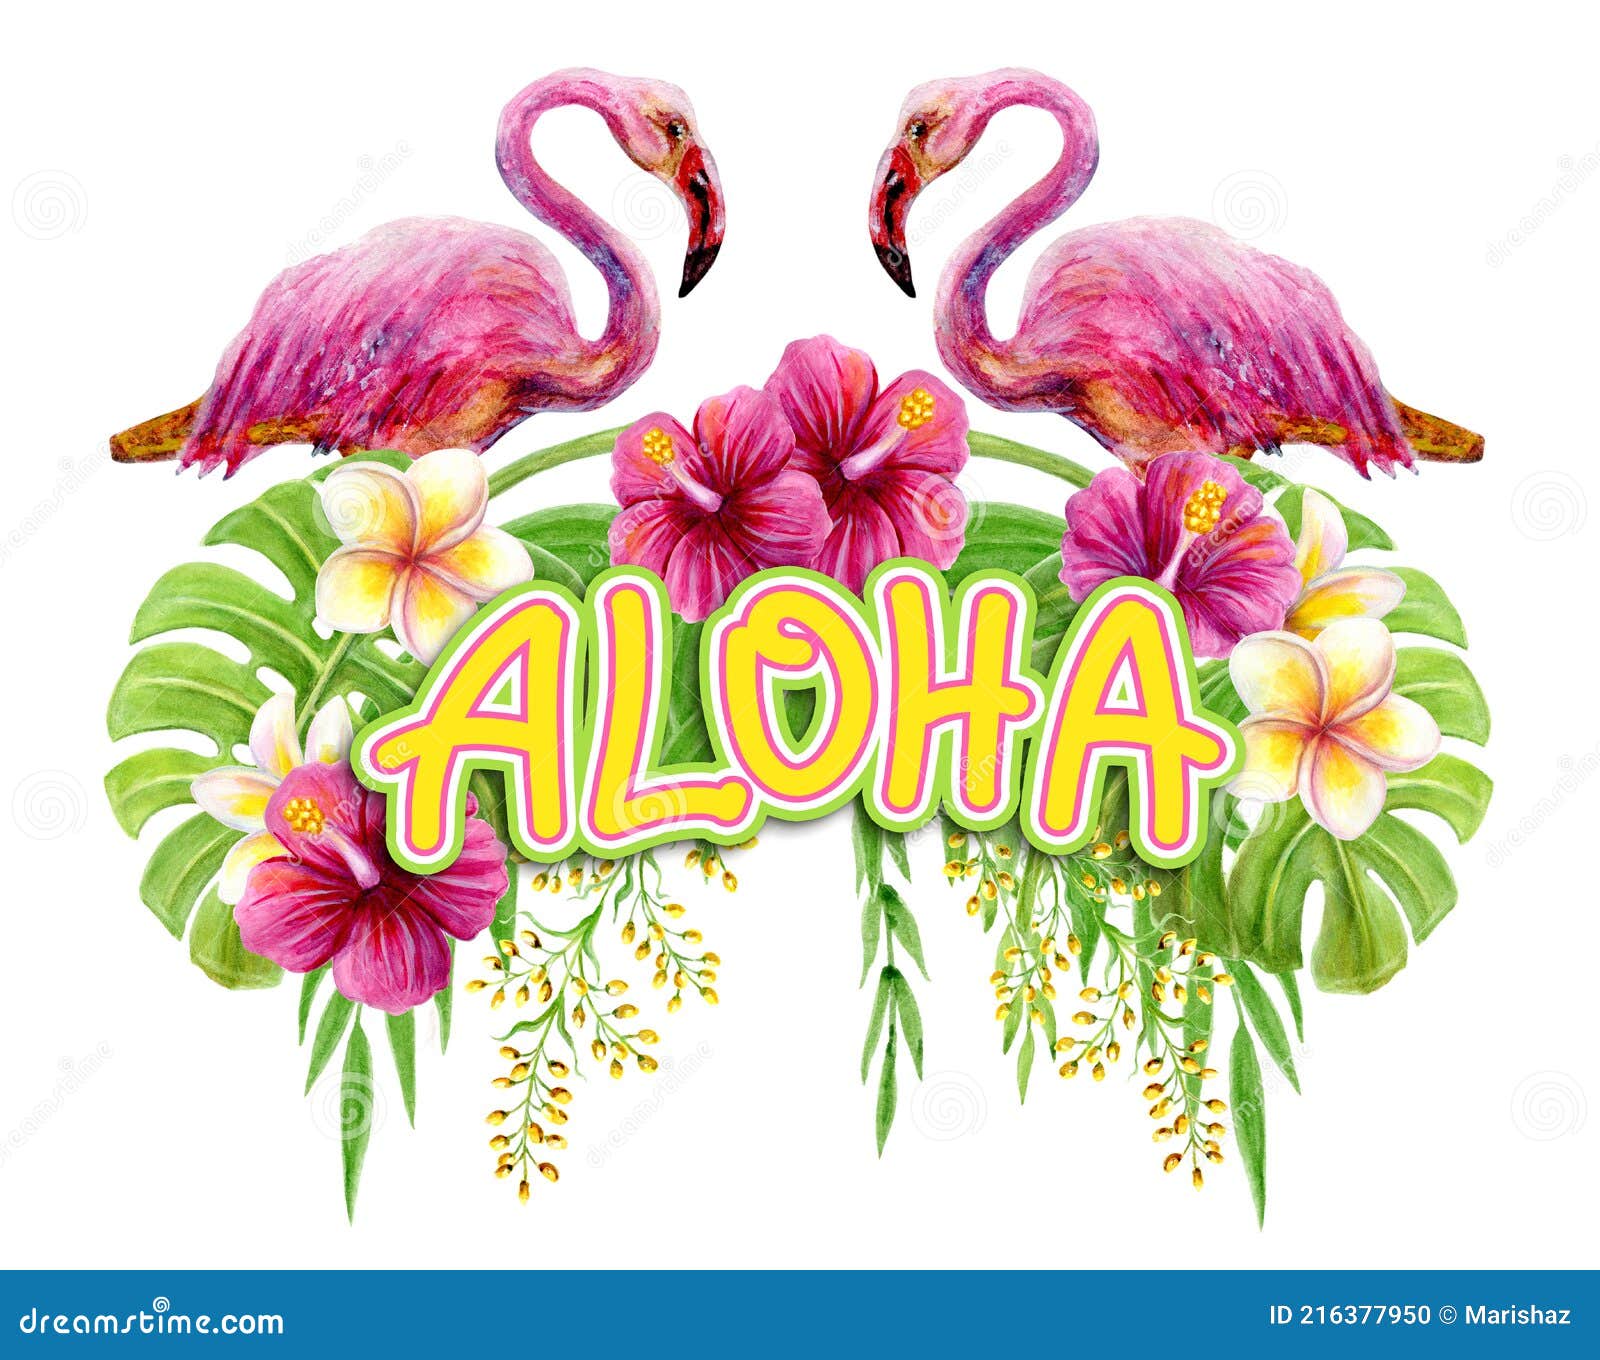 aloha hawaii greeting. hand drawn watercolor painting with two pink flamingo, chinese hibiscus rose flowers and palm leave